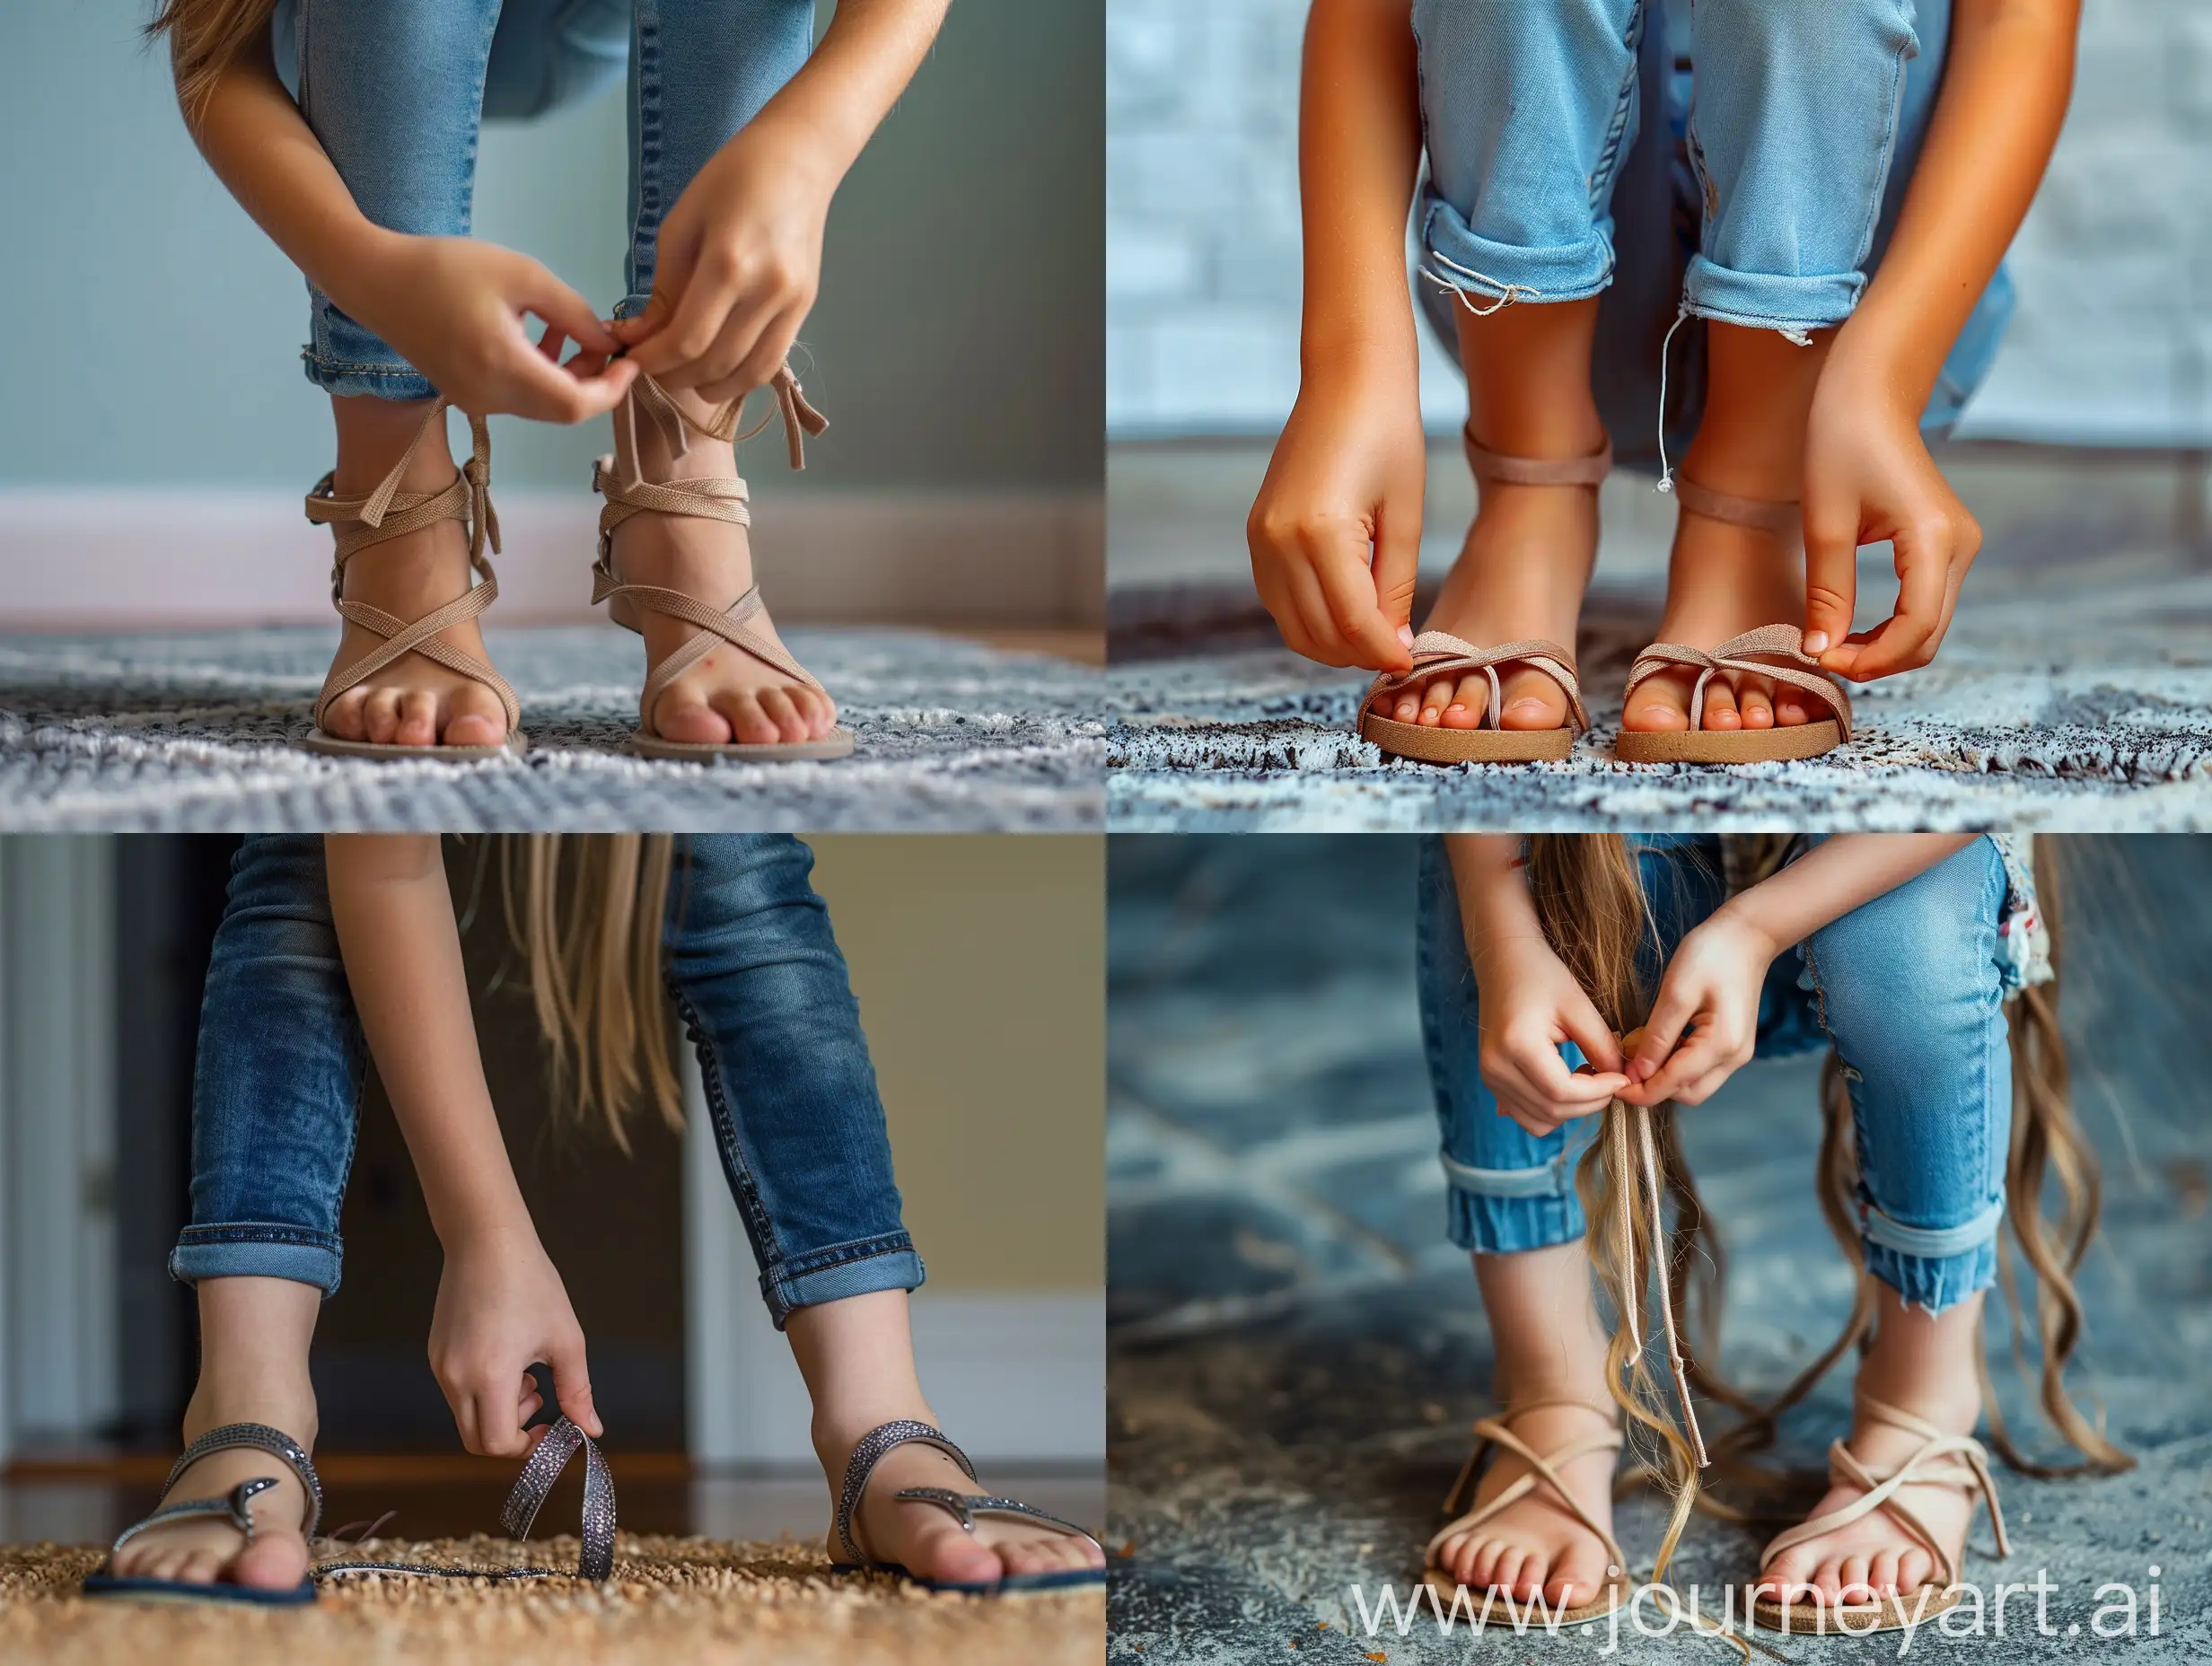 Young-Girl-Putting-on-Sandals-and-Skinny-Jeans-CloseUp-Photo